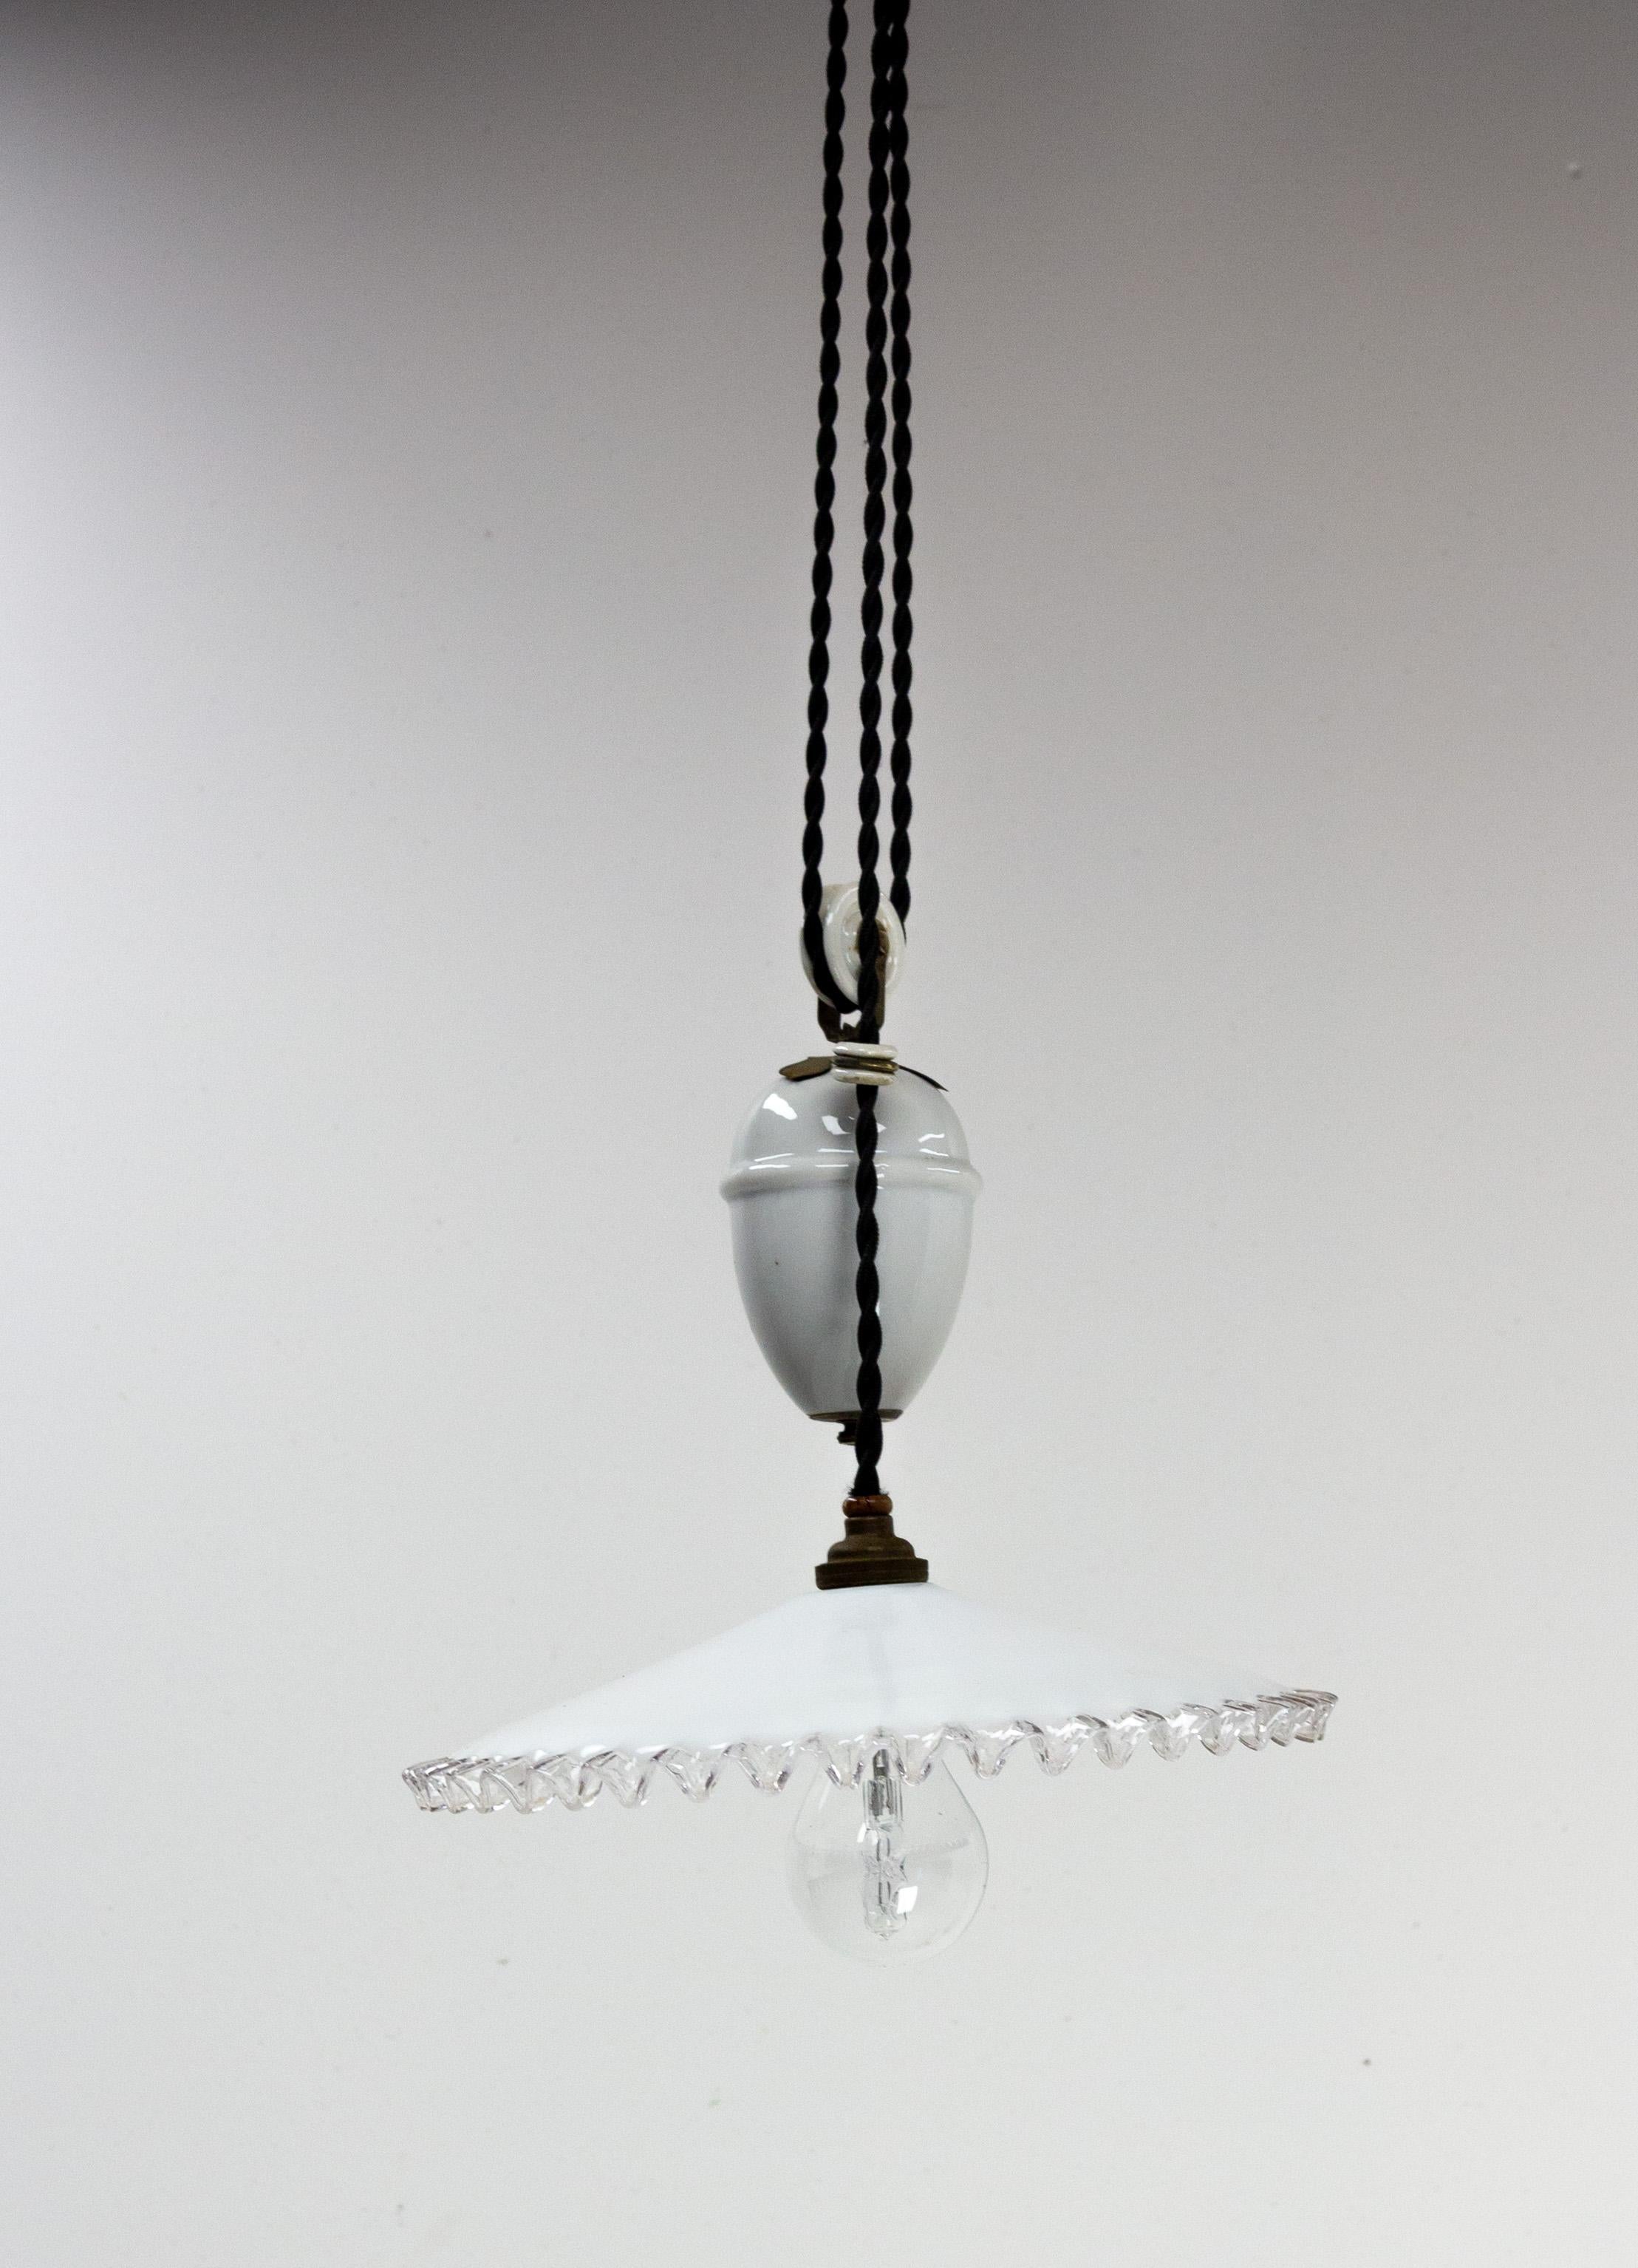 Ceiling pendant lamp in glass and opaline early 20th century.
French counter weight chandelier. White glass diffuser and porcelain weight for adjusting the overall length.
Height between 37 in. and 85.43 in. (94-217 cm)

Good antique condition 
This